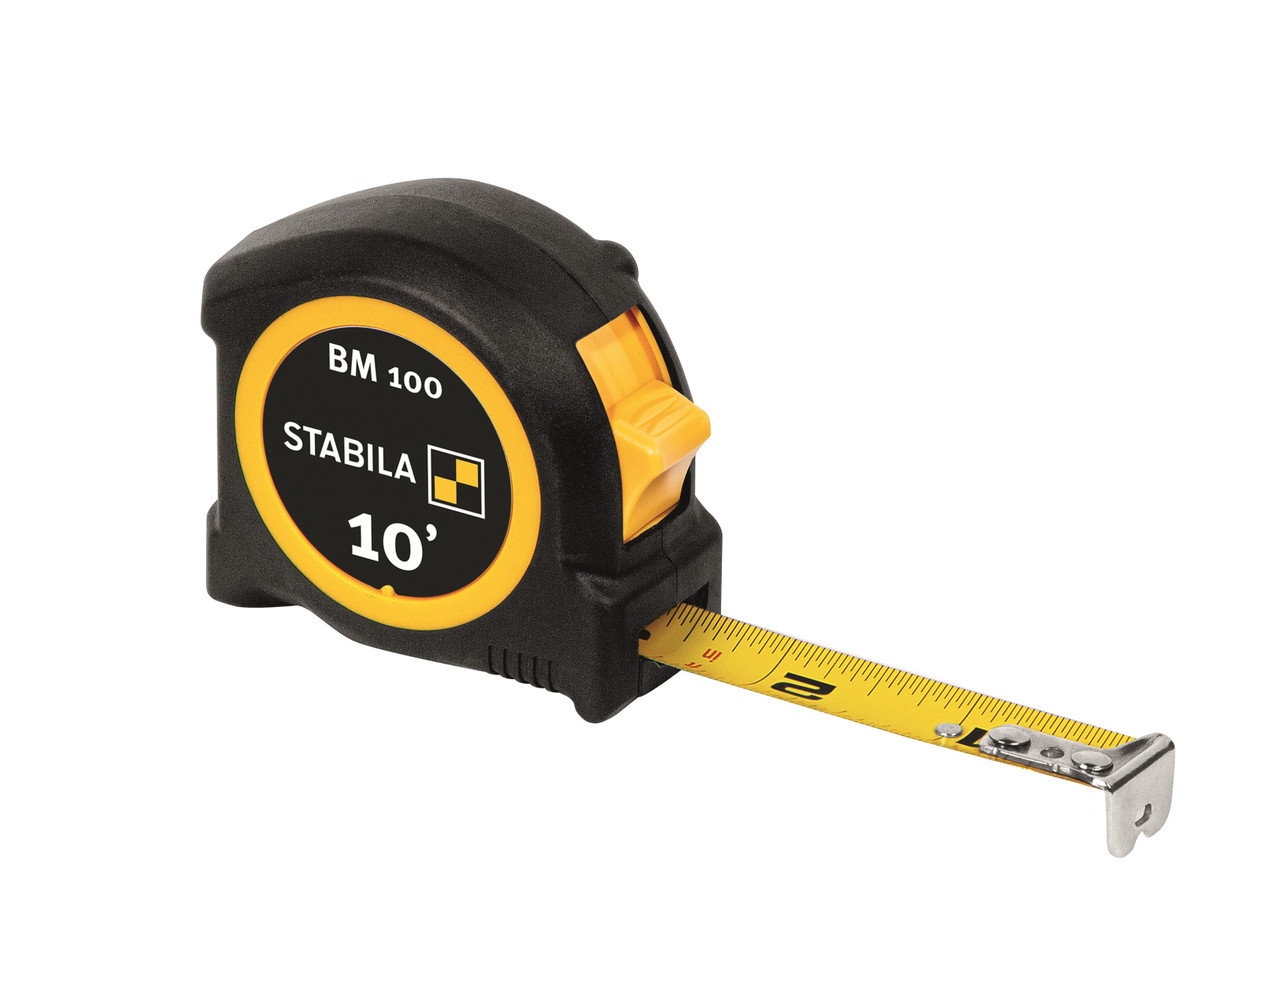 WIN TAPE Workbench Ruler Adhesive Backed Tape Measure -30 Inch